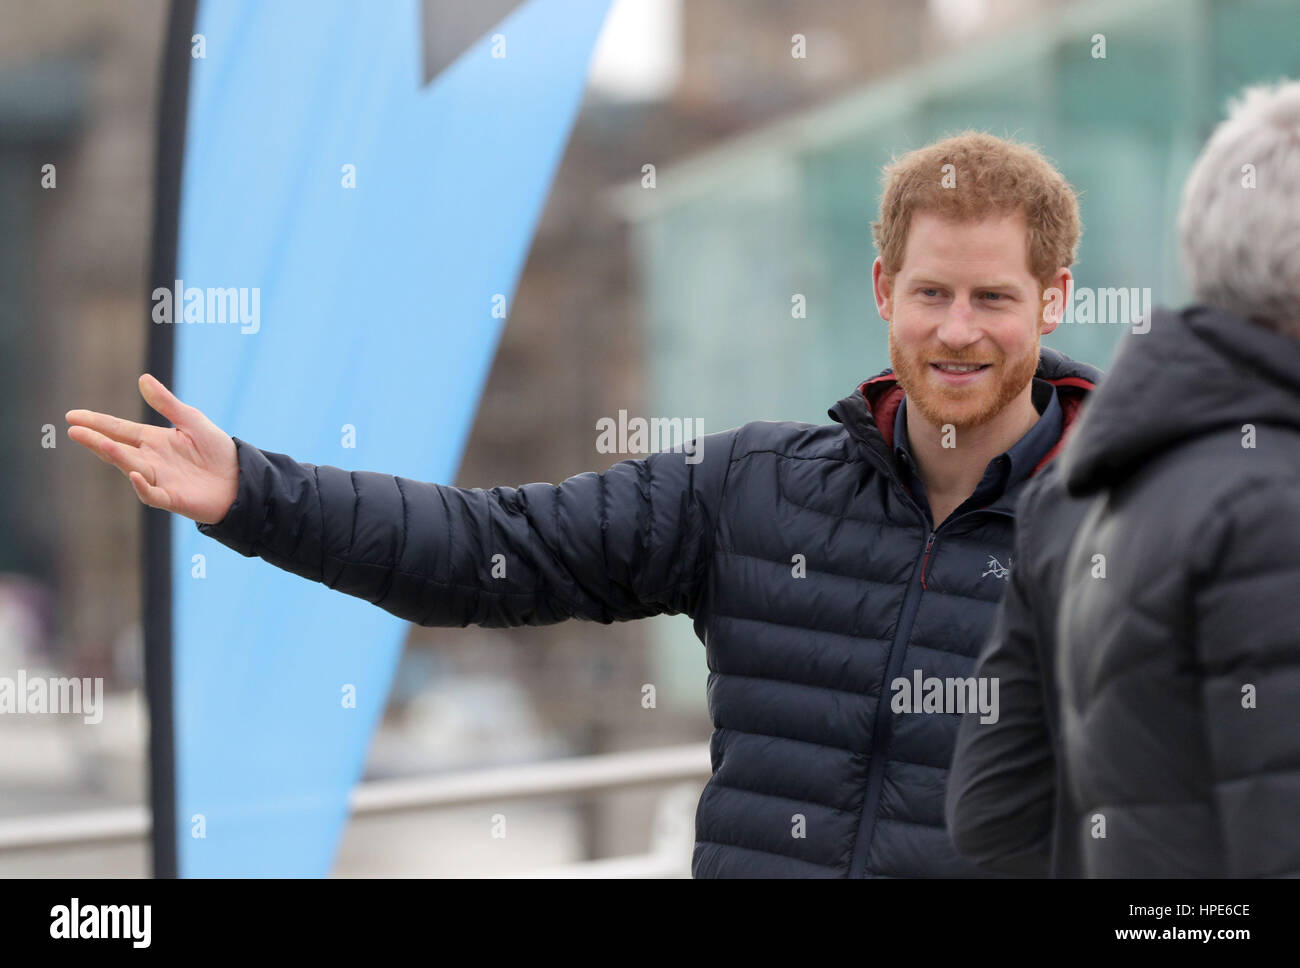 Prince Harry arriving at the Quayside in Gateshead where he will team up with Steve Cram and Jonathan Edwards as they train runners taking part in the London Marathon for mental health charity Heads Together. Stock Photo